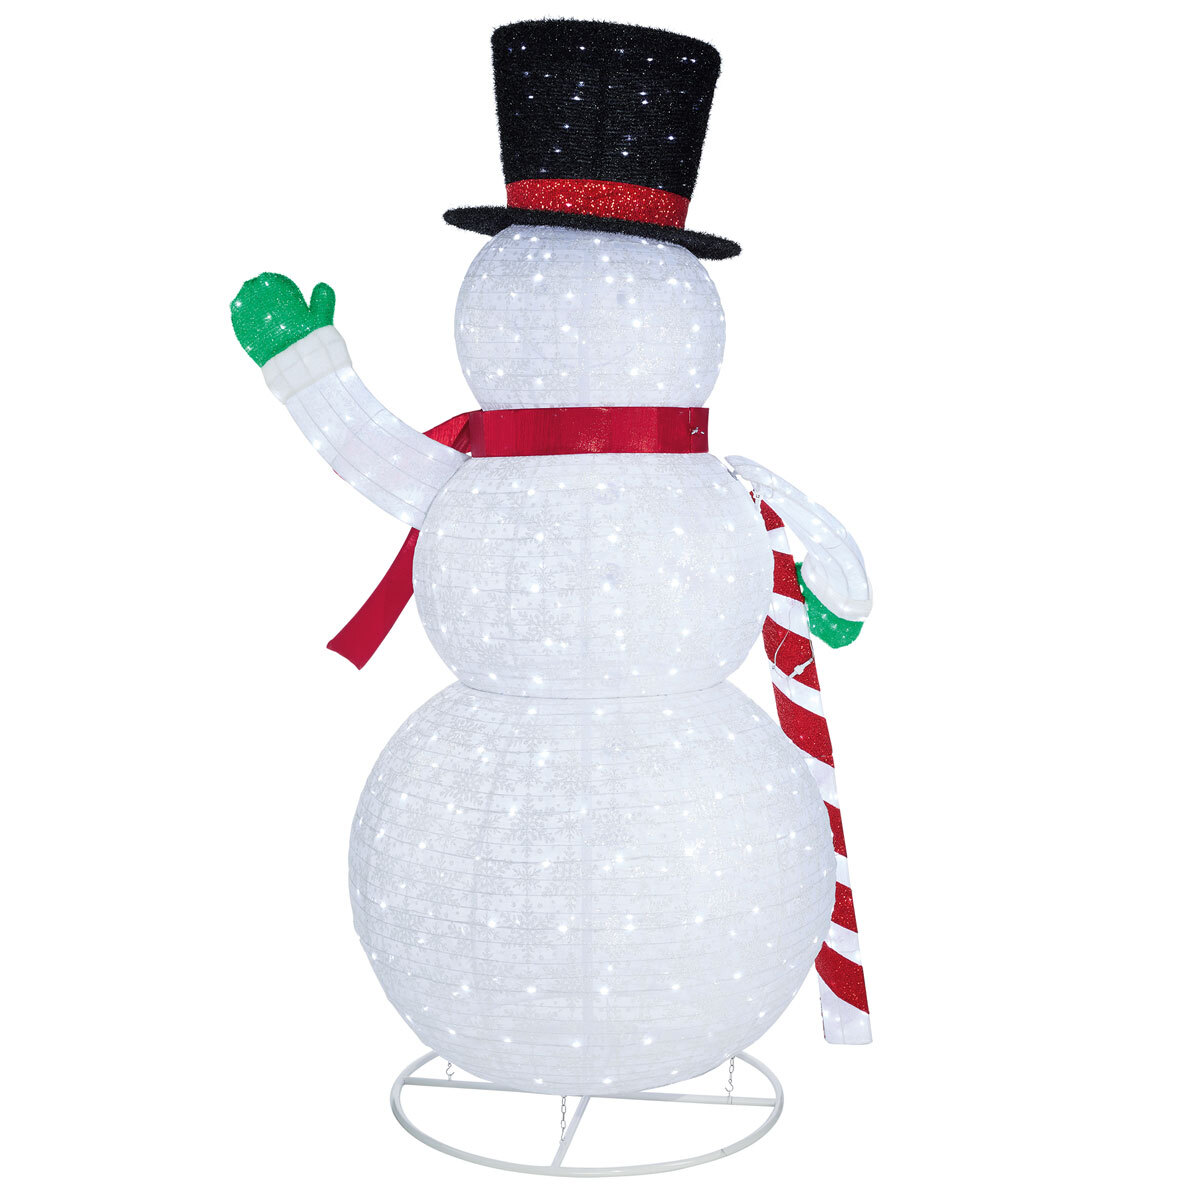 Buy 96" Pop-Up Snowman Back Image at Costco.co.uk